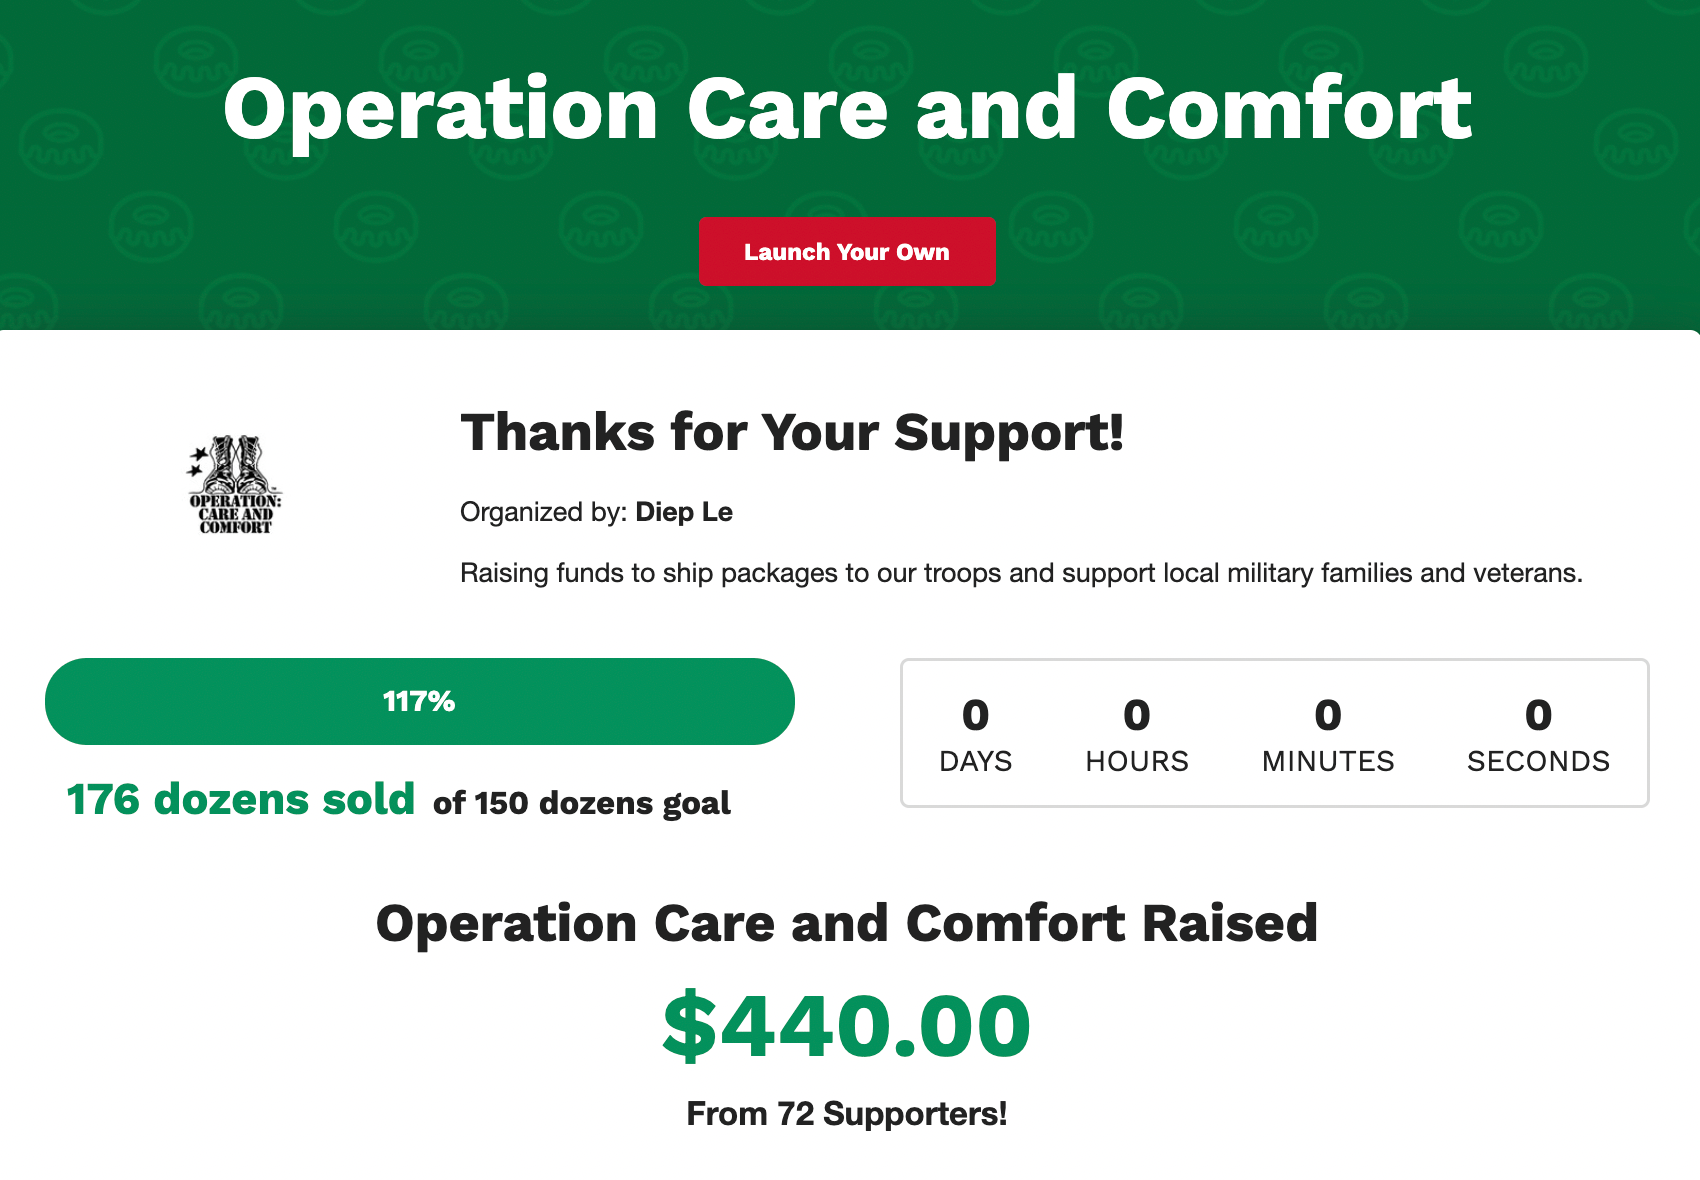 Operation Care and Comfort's Digital Dozens Fundraising Campaign Page